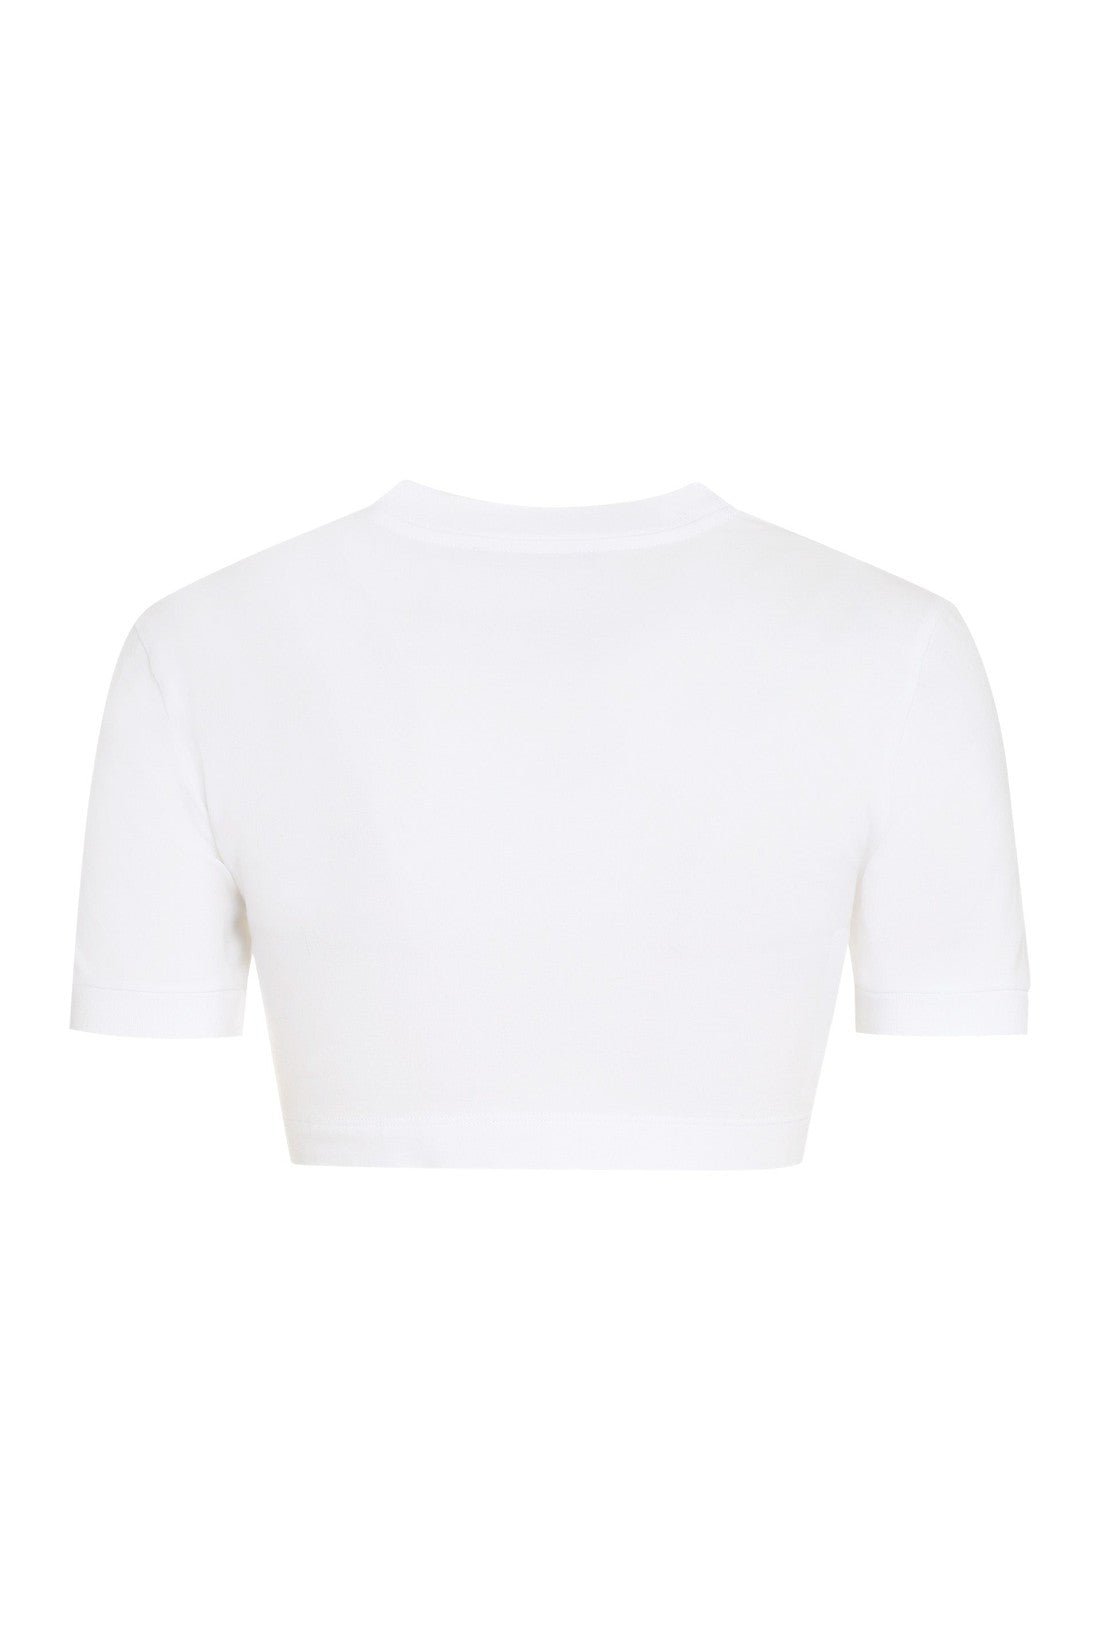 Dolce & Gabbana-OUTLET-SALE-Crop-top with logo-ARCHIVIST